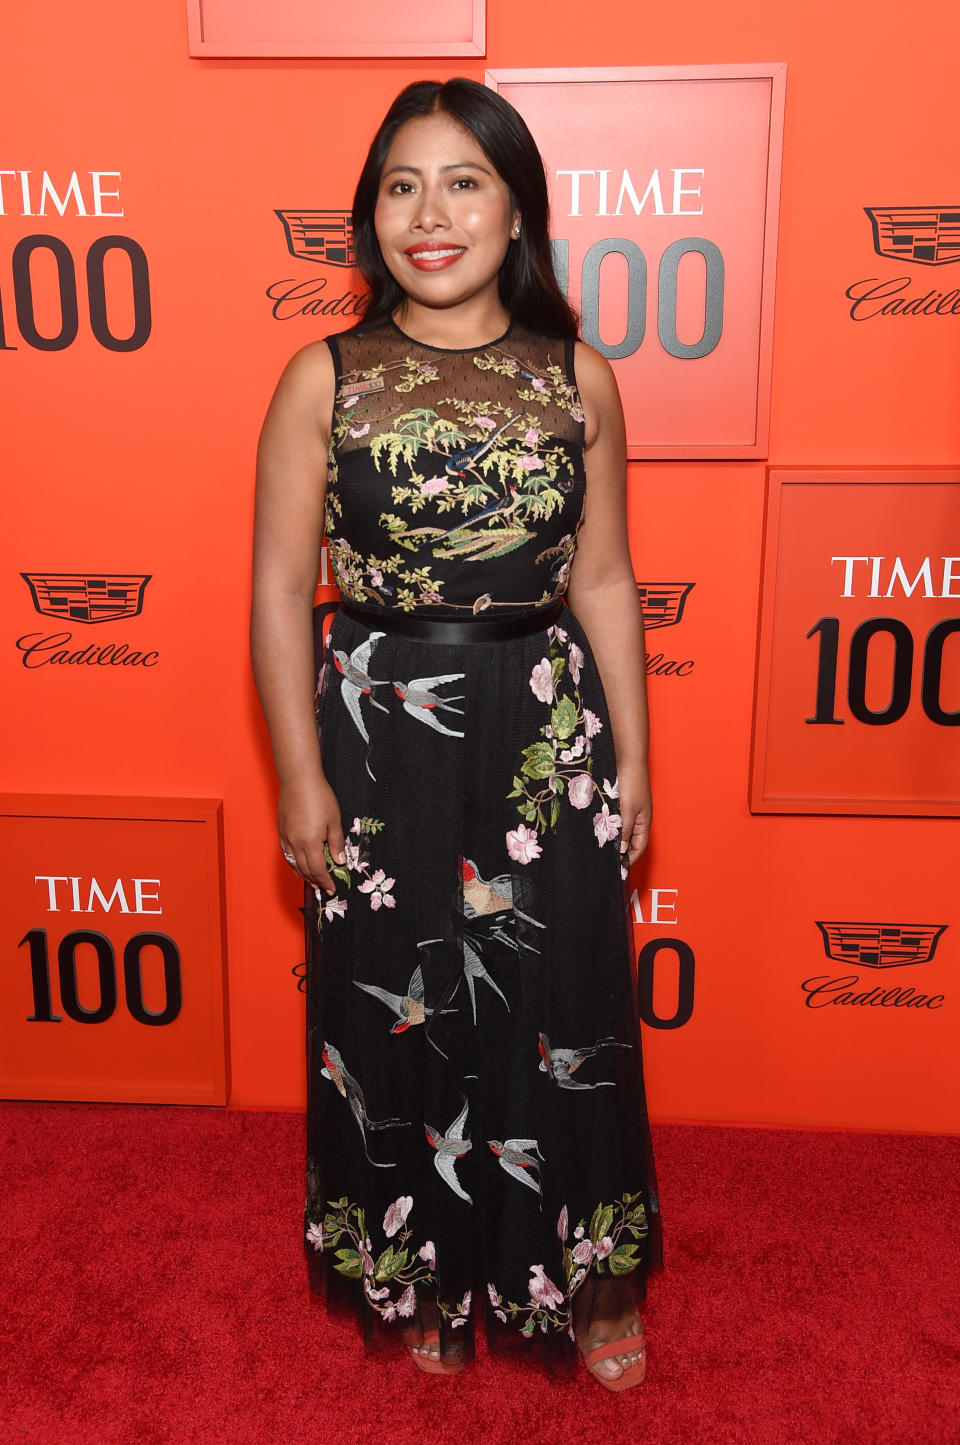 NEW YORK, NY - APRIL 23:  Yalitza Aparicio attends the 2019 Time 100 Gala at Frederick P. Rose Hall, Jazz at Lincoln Center on April 23, 2019 in New York City.  (Photo by Jamie McCarthy/WireImage)